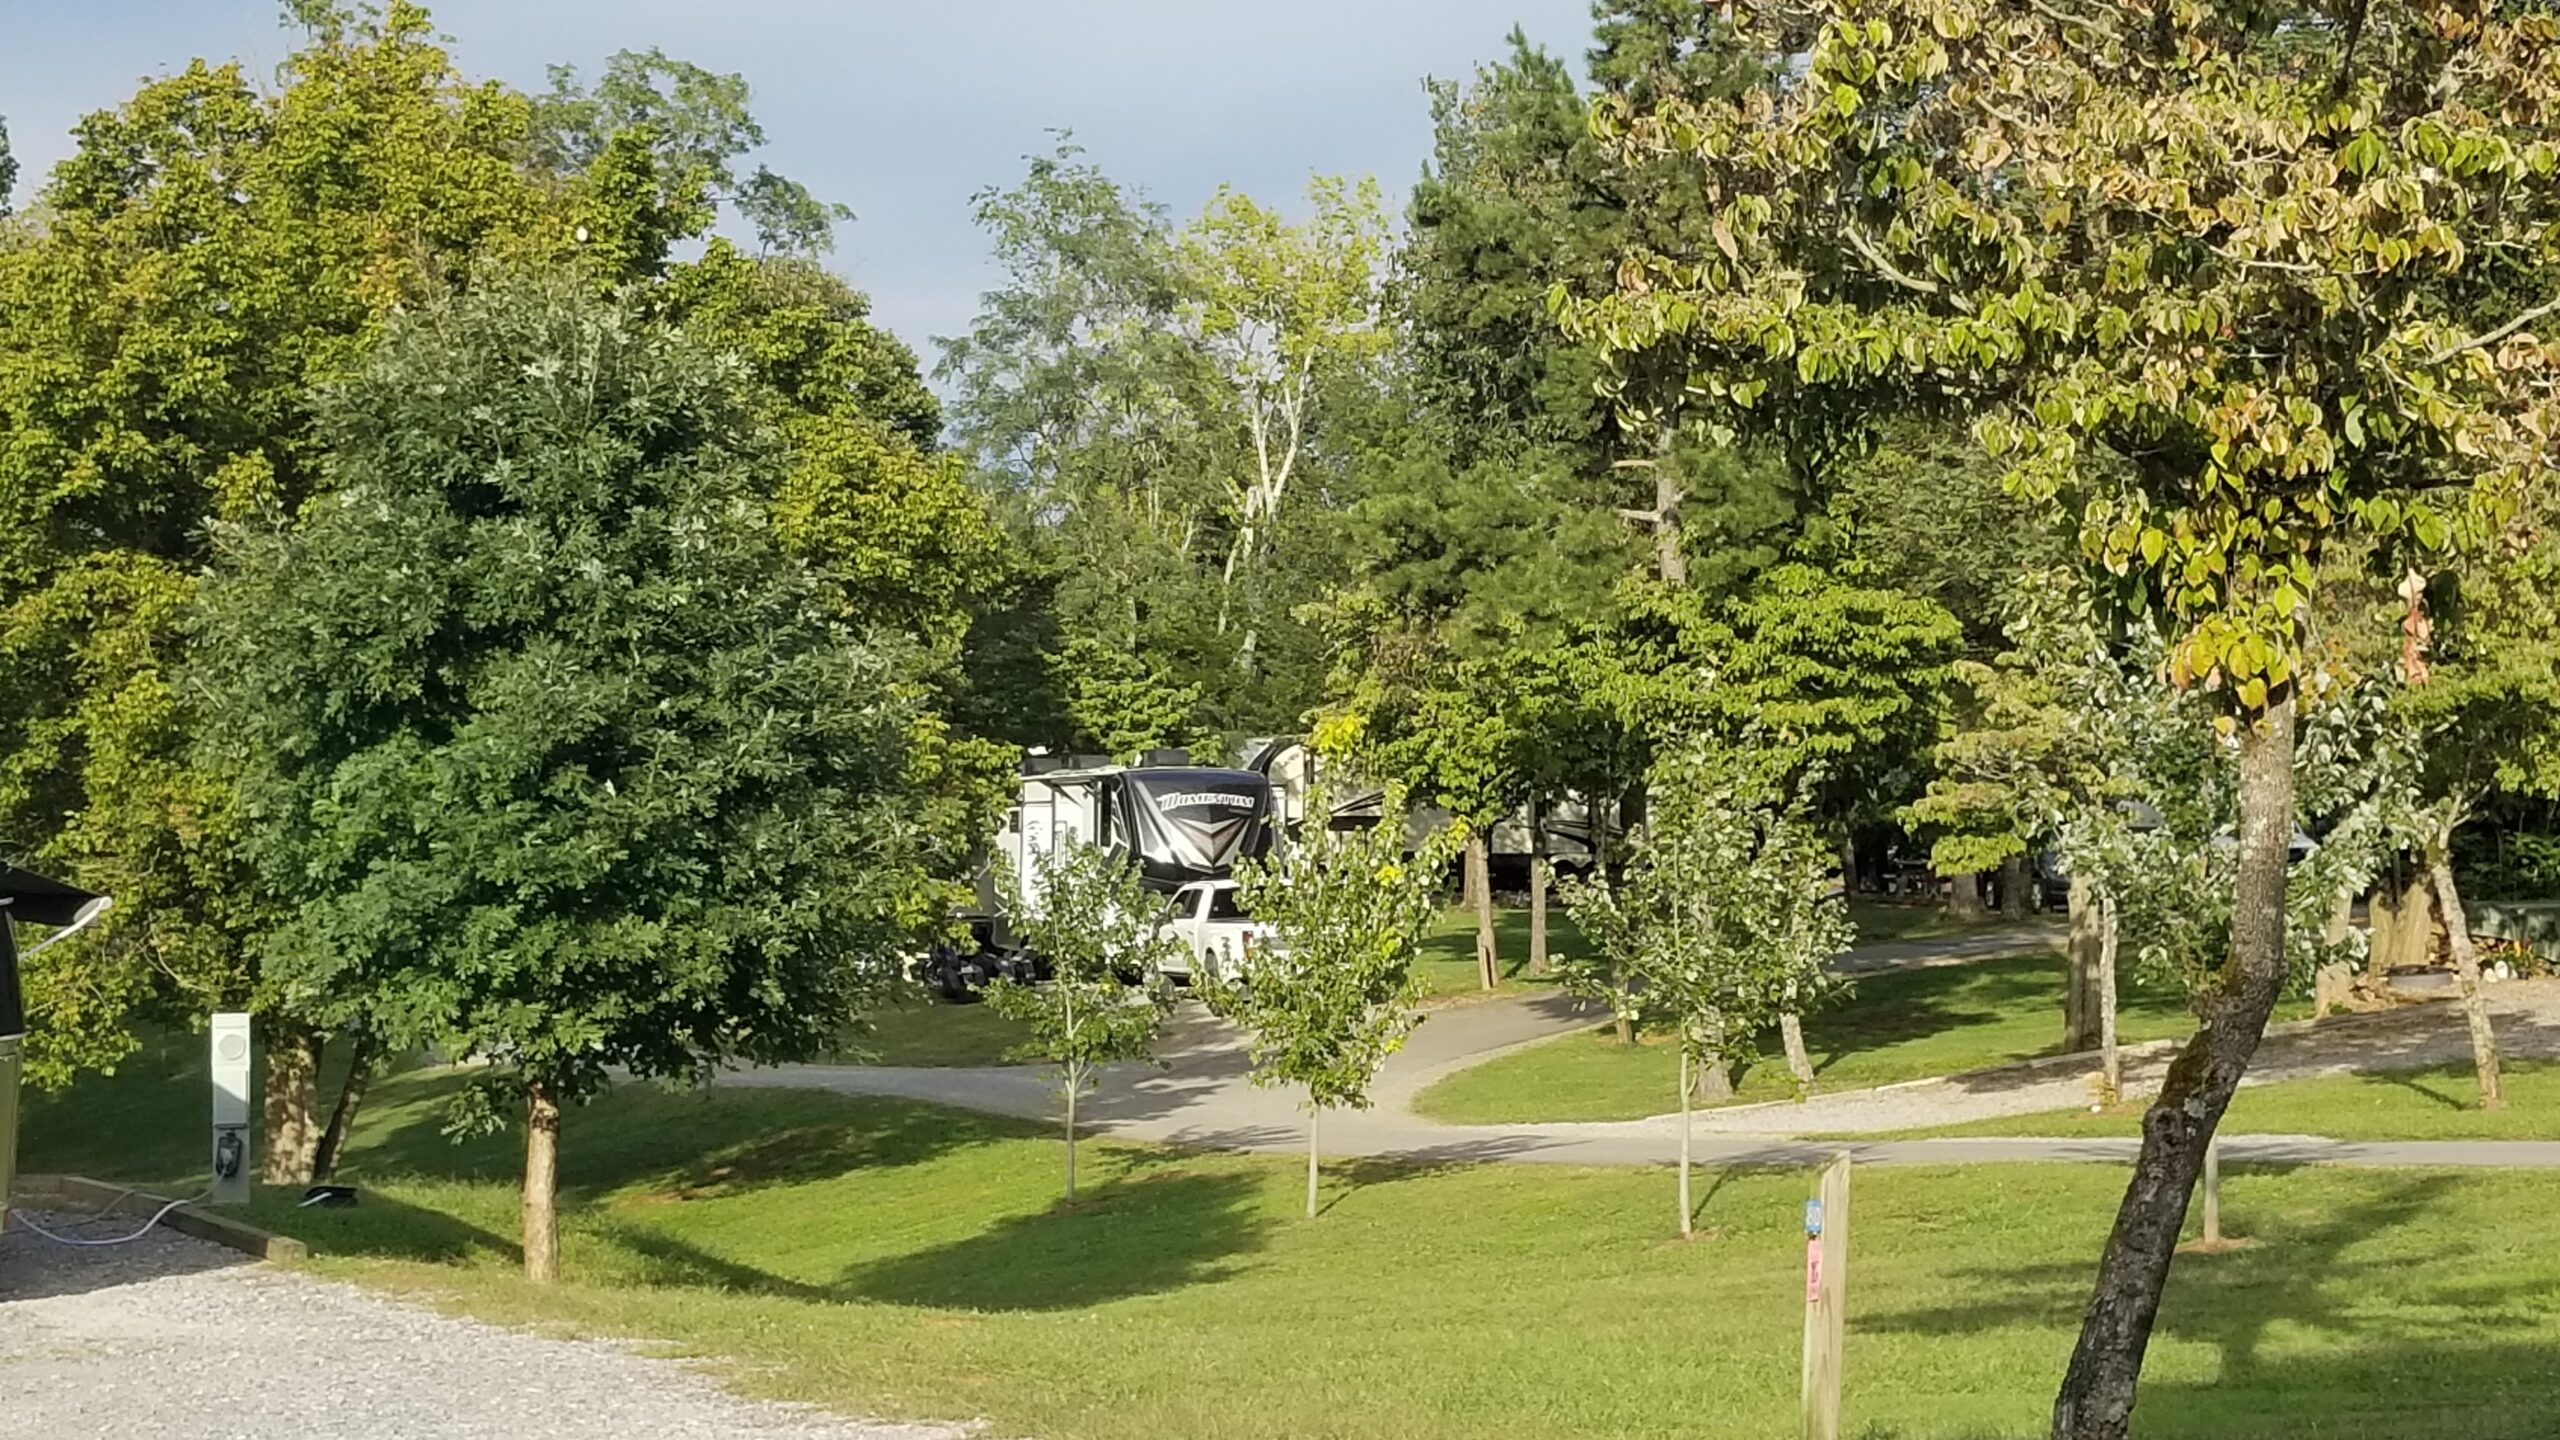 RV in campsite surrounded by trees